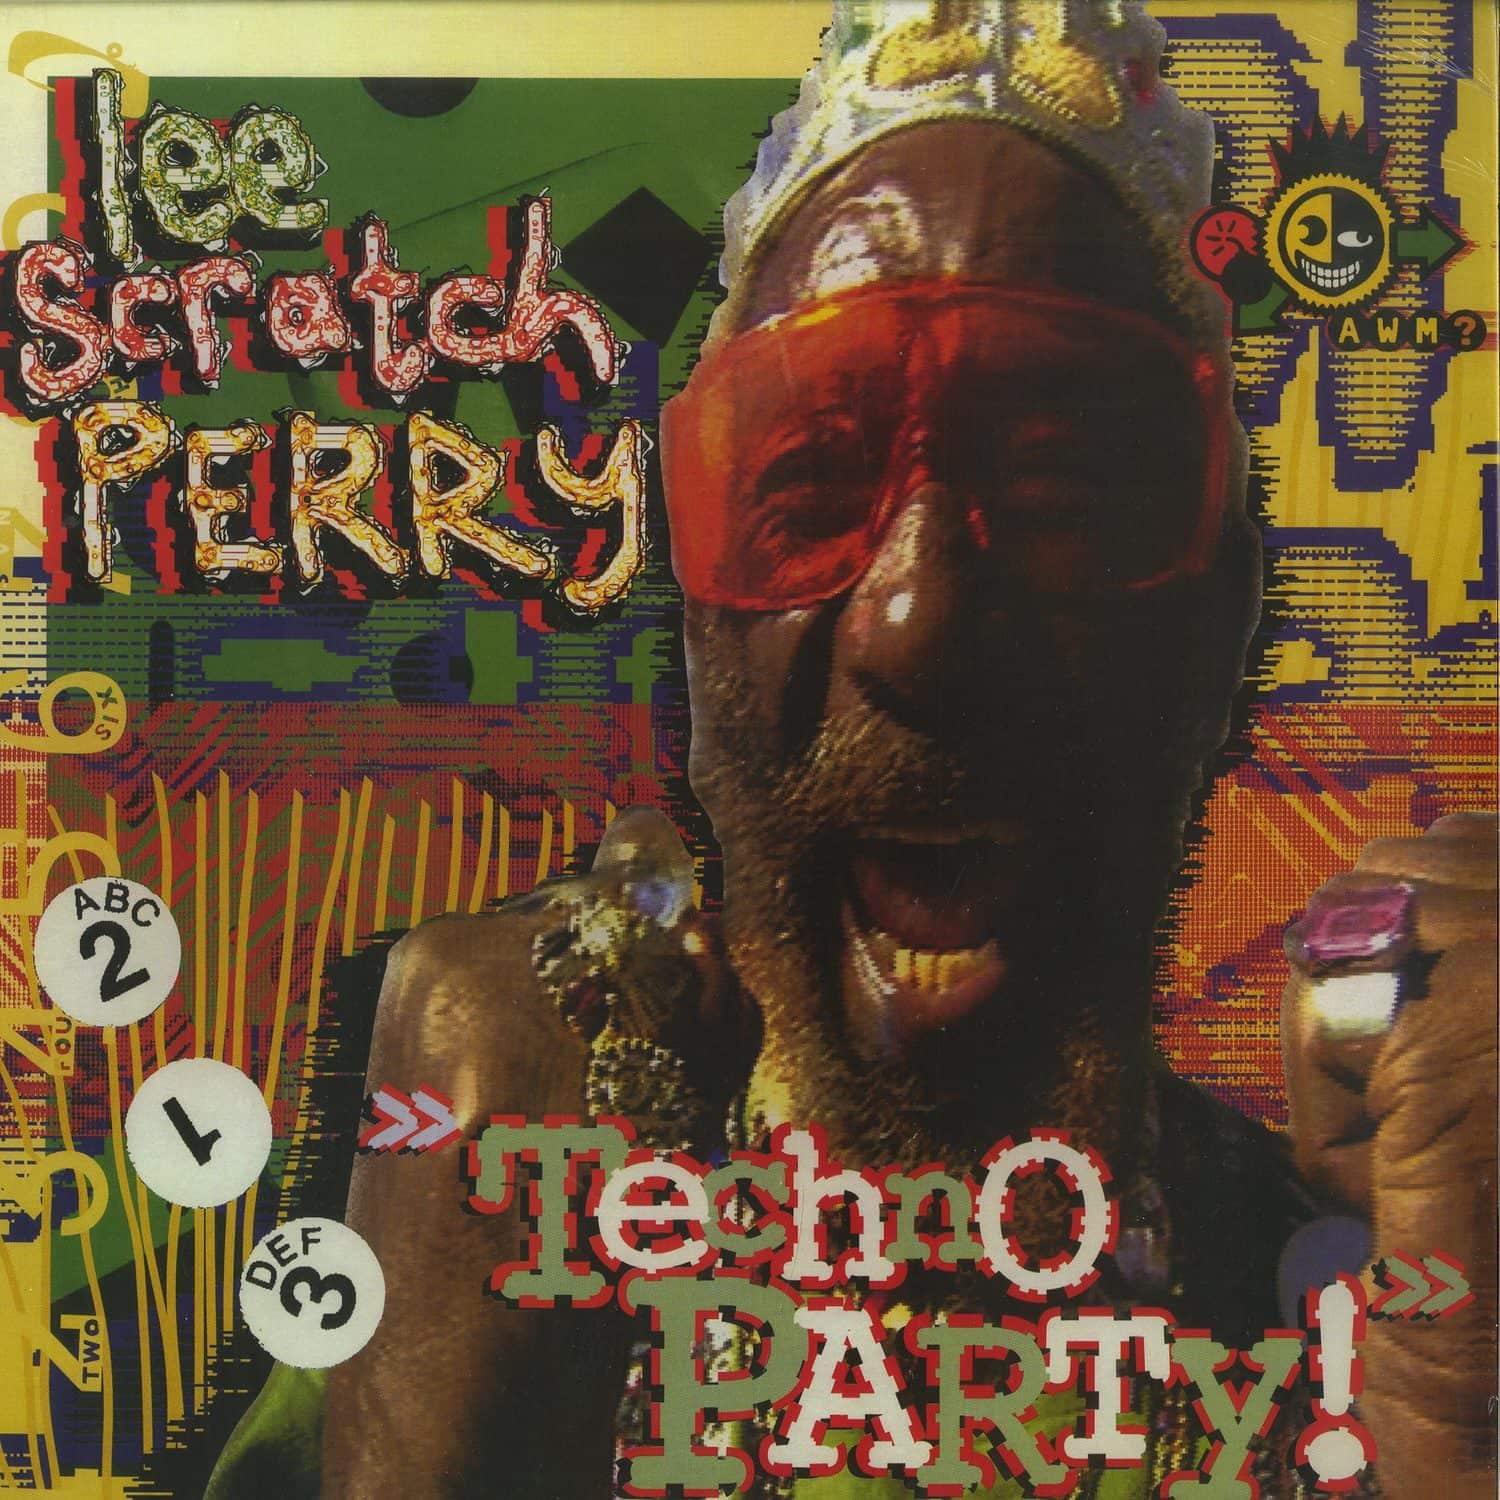 Lee Scratch Perry - TECHNO PARTY 